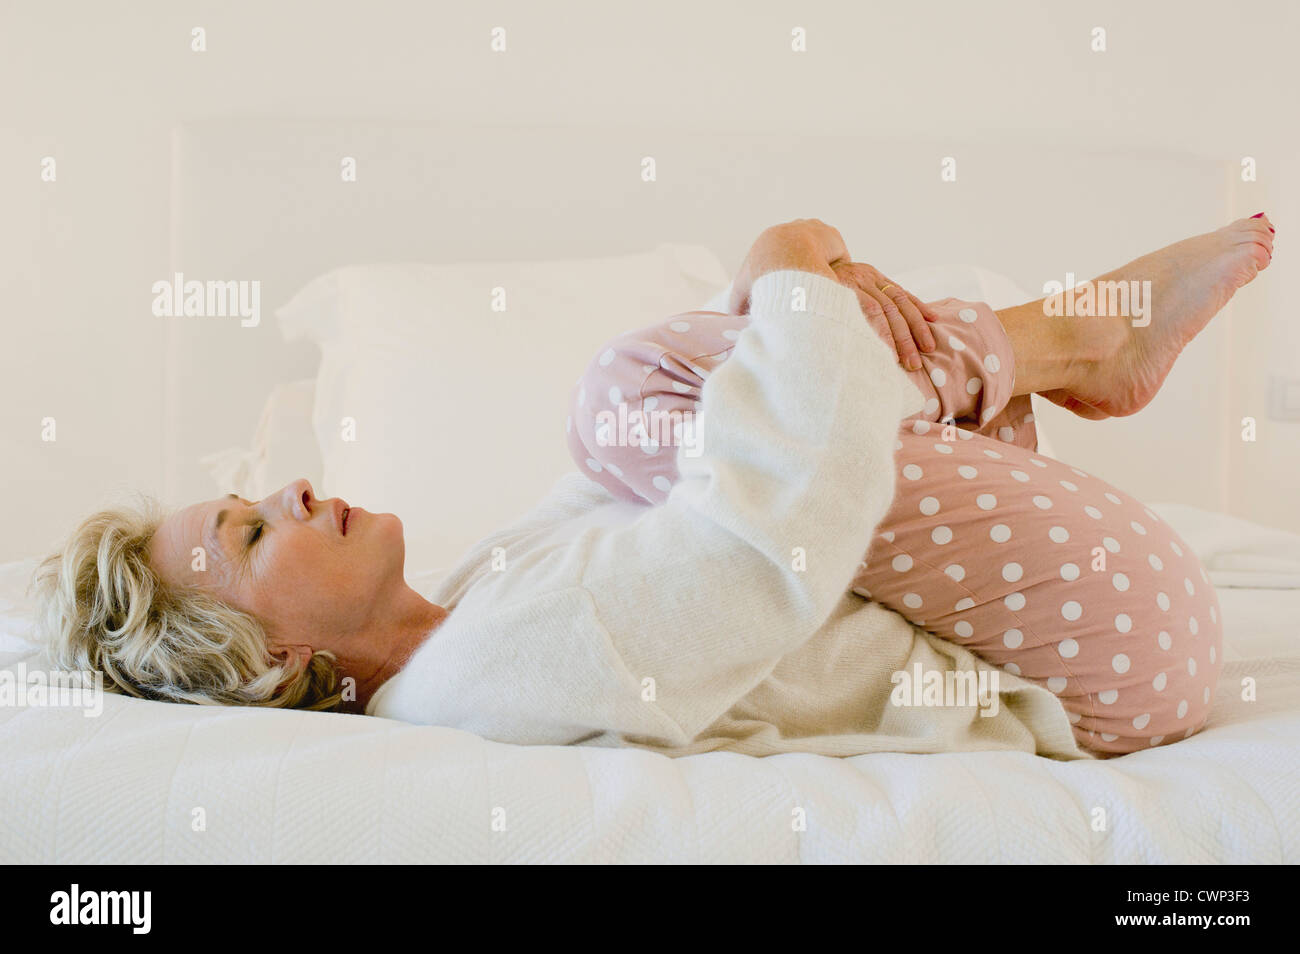 Mature woman lying on bed in fetal position Stock Photo